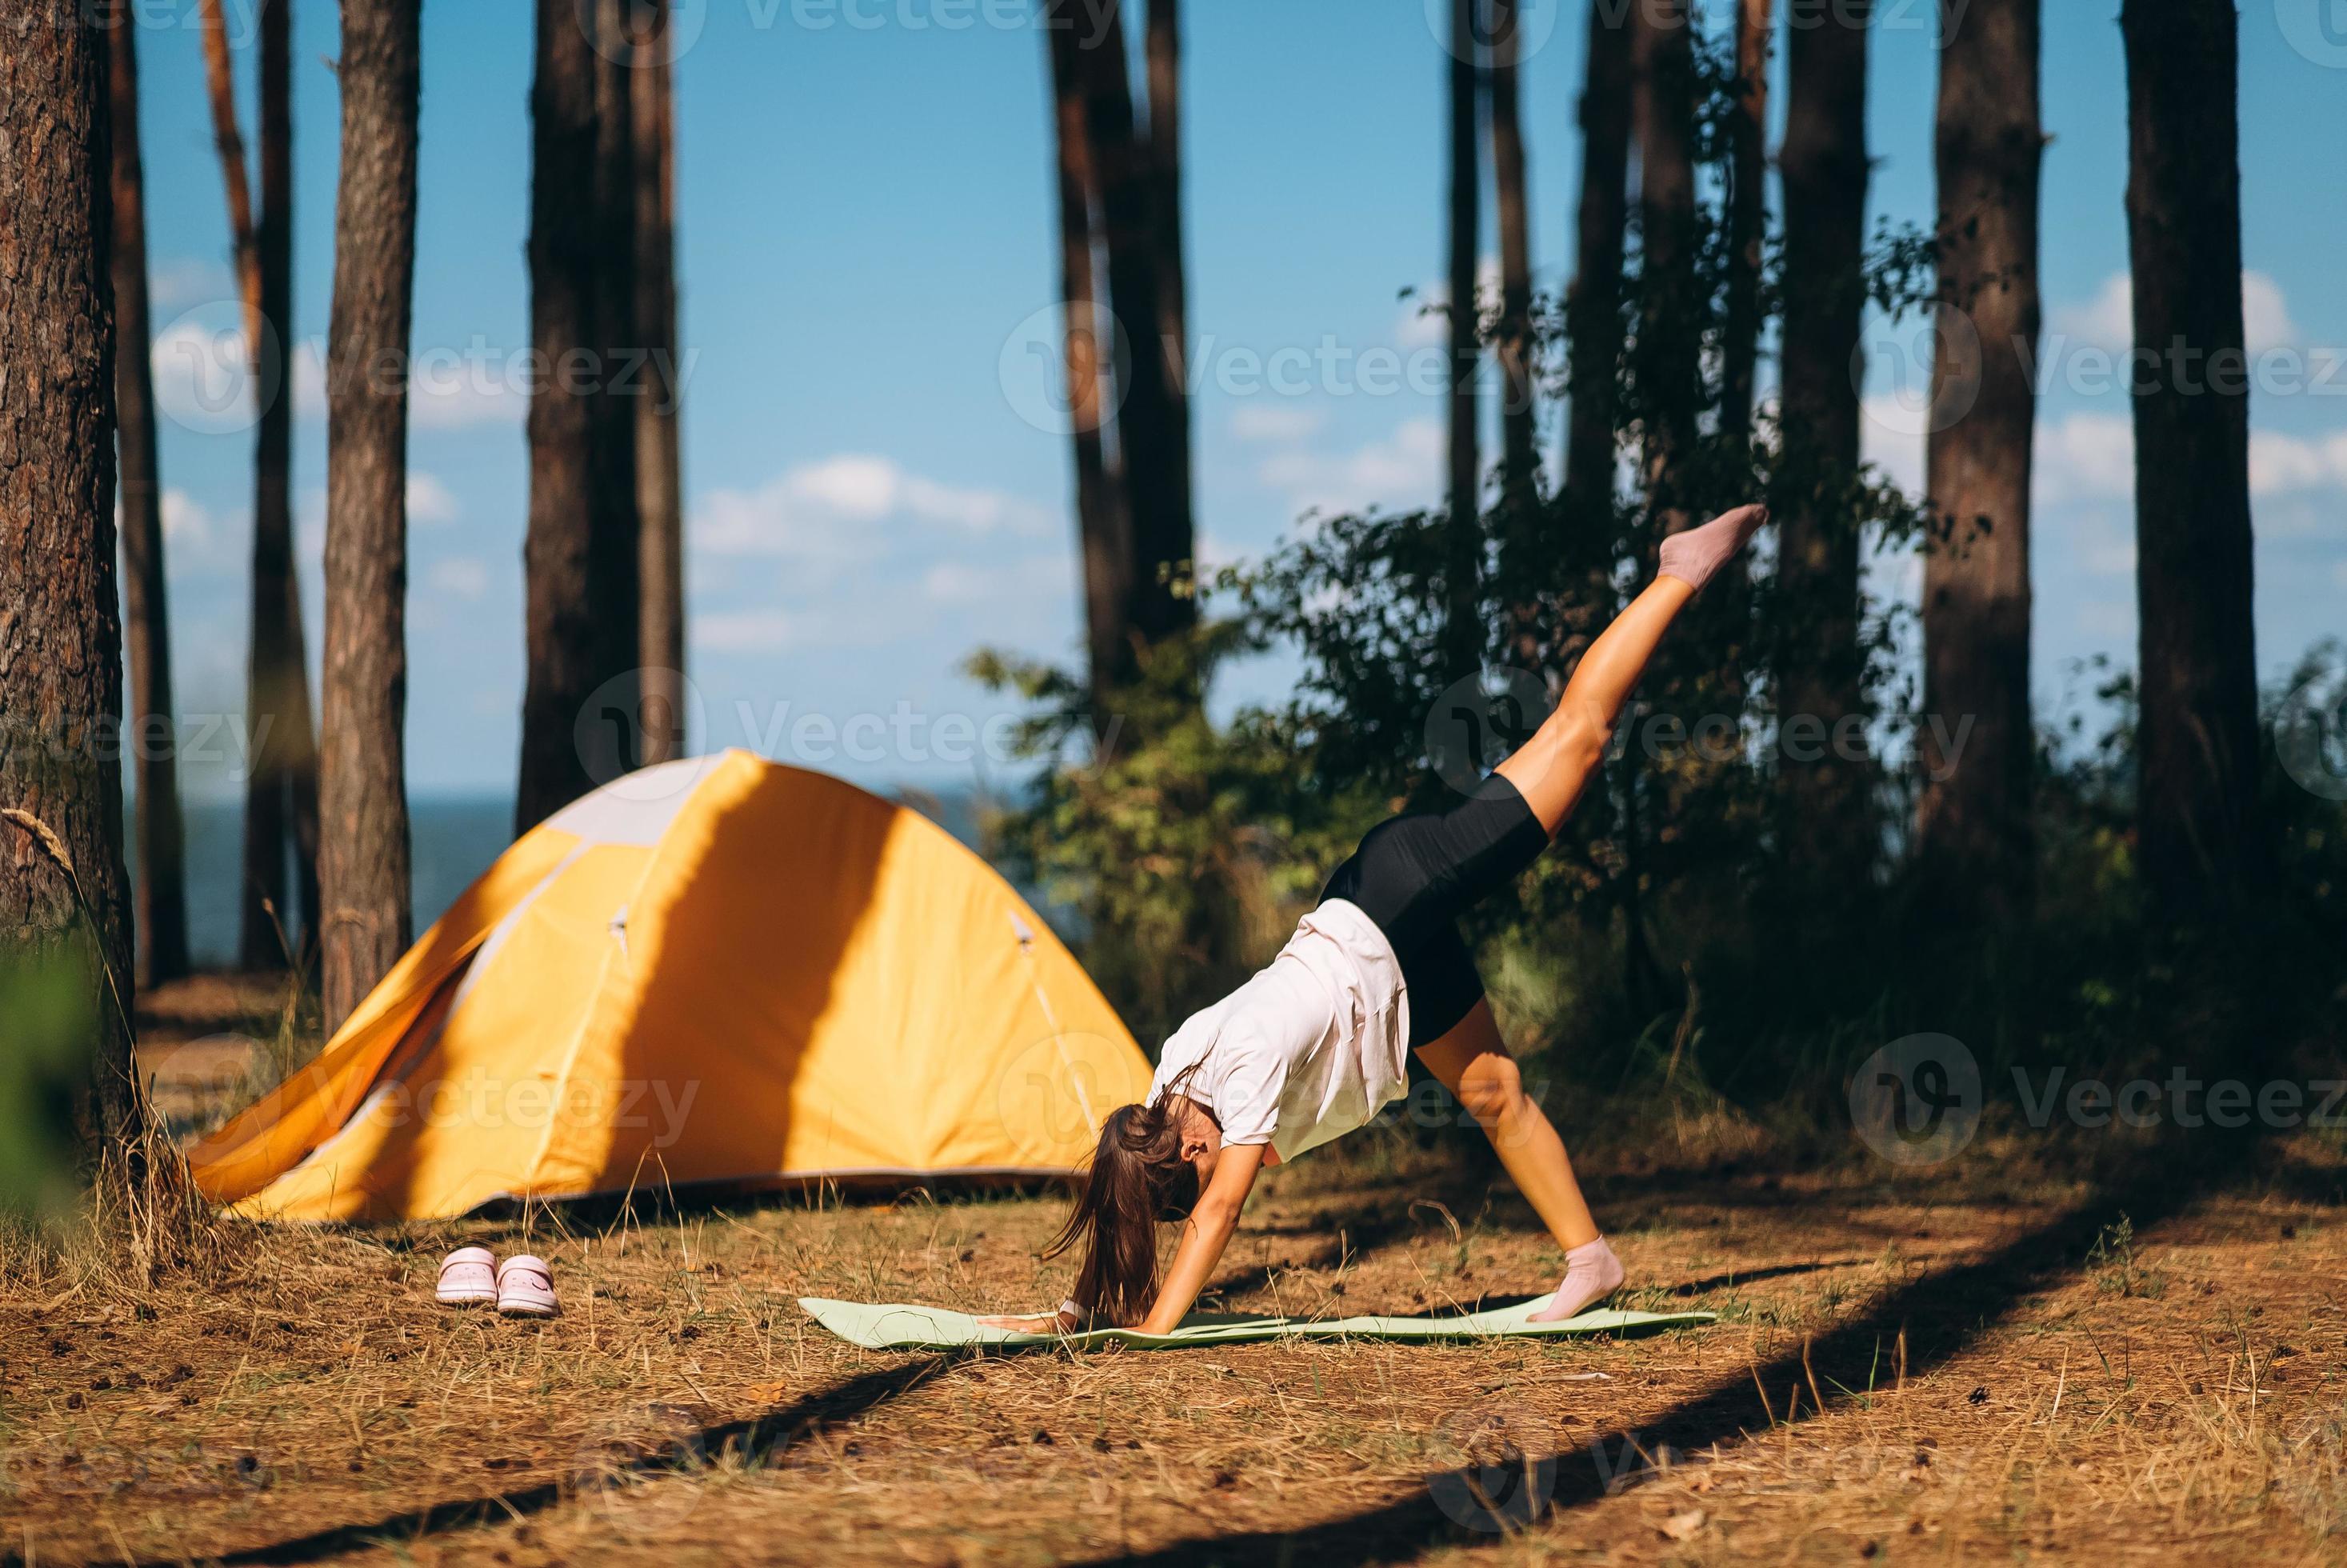 Woman doing morning yoga exercises in woods near yellow tourist